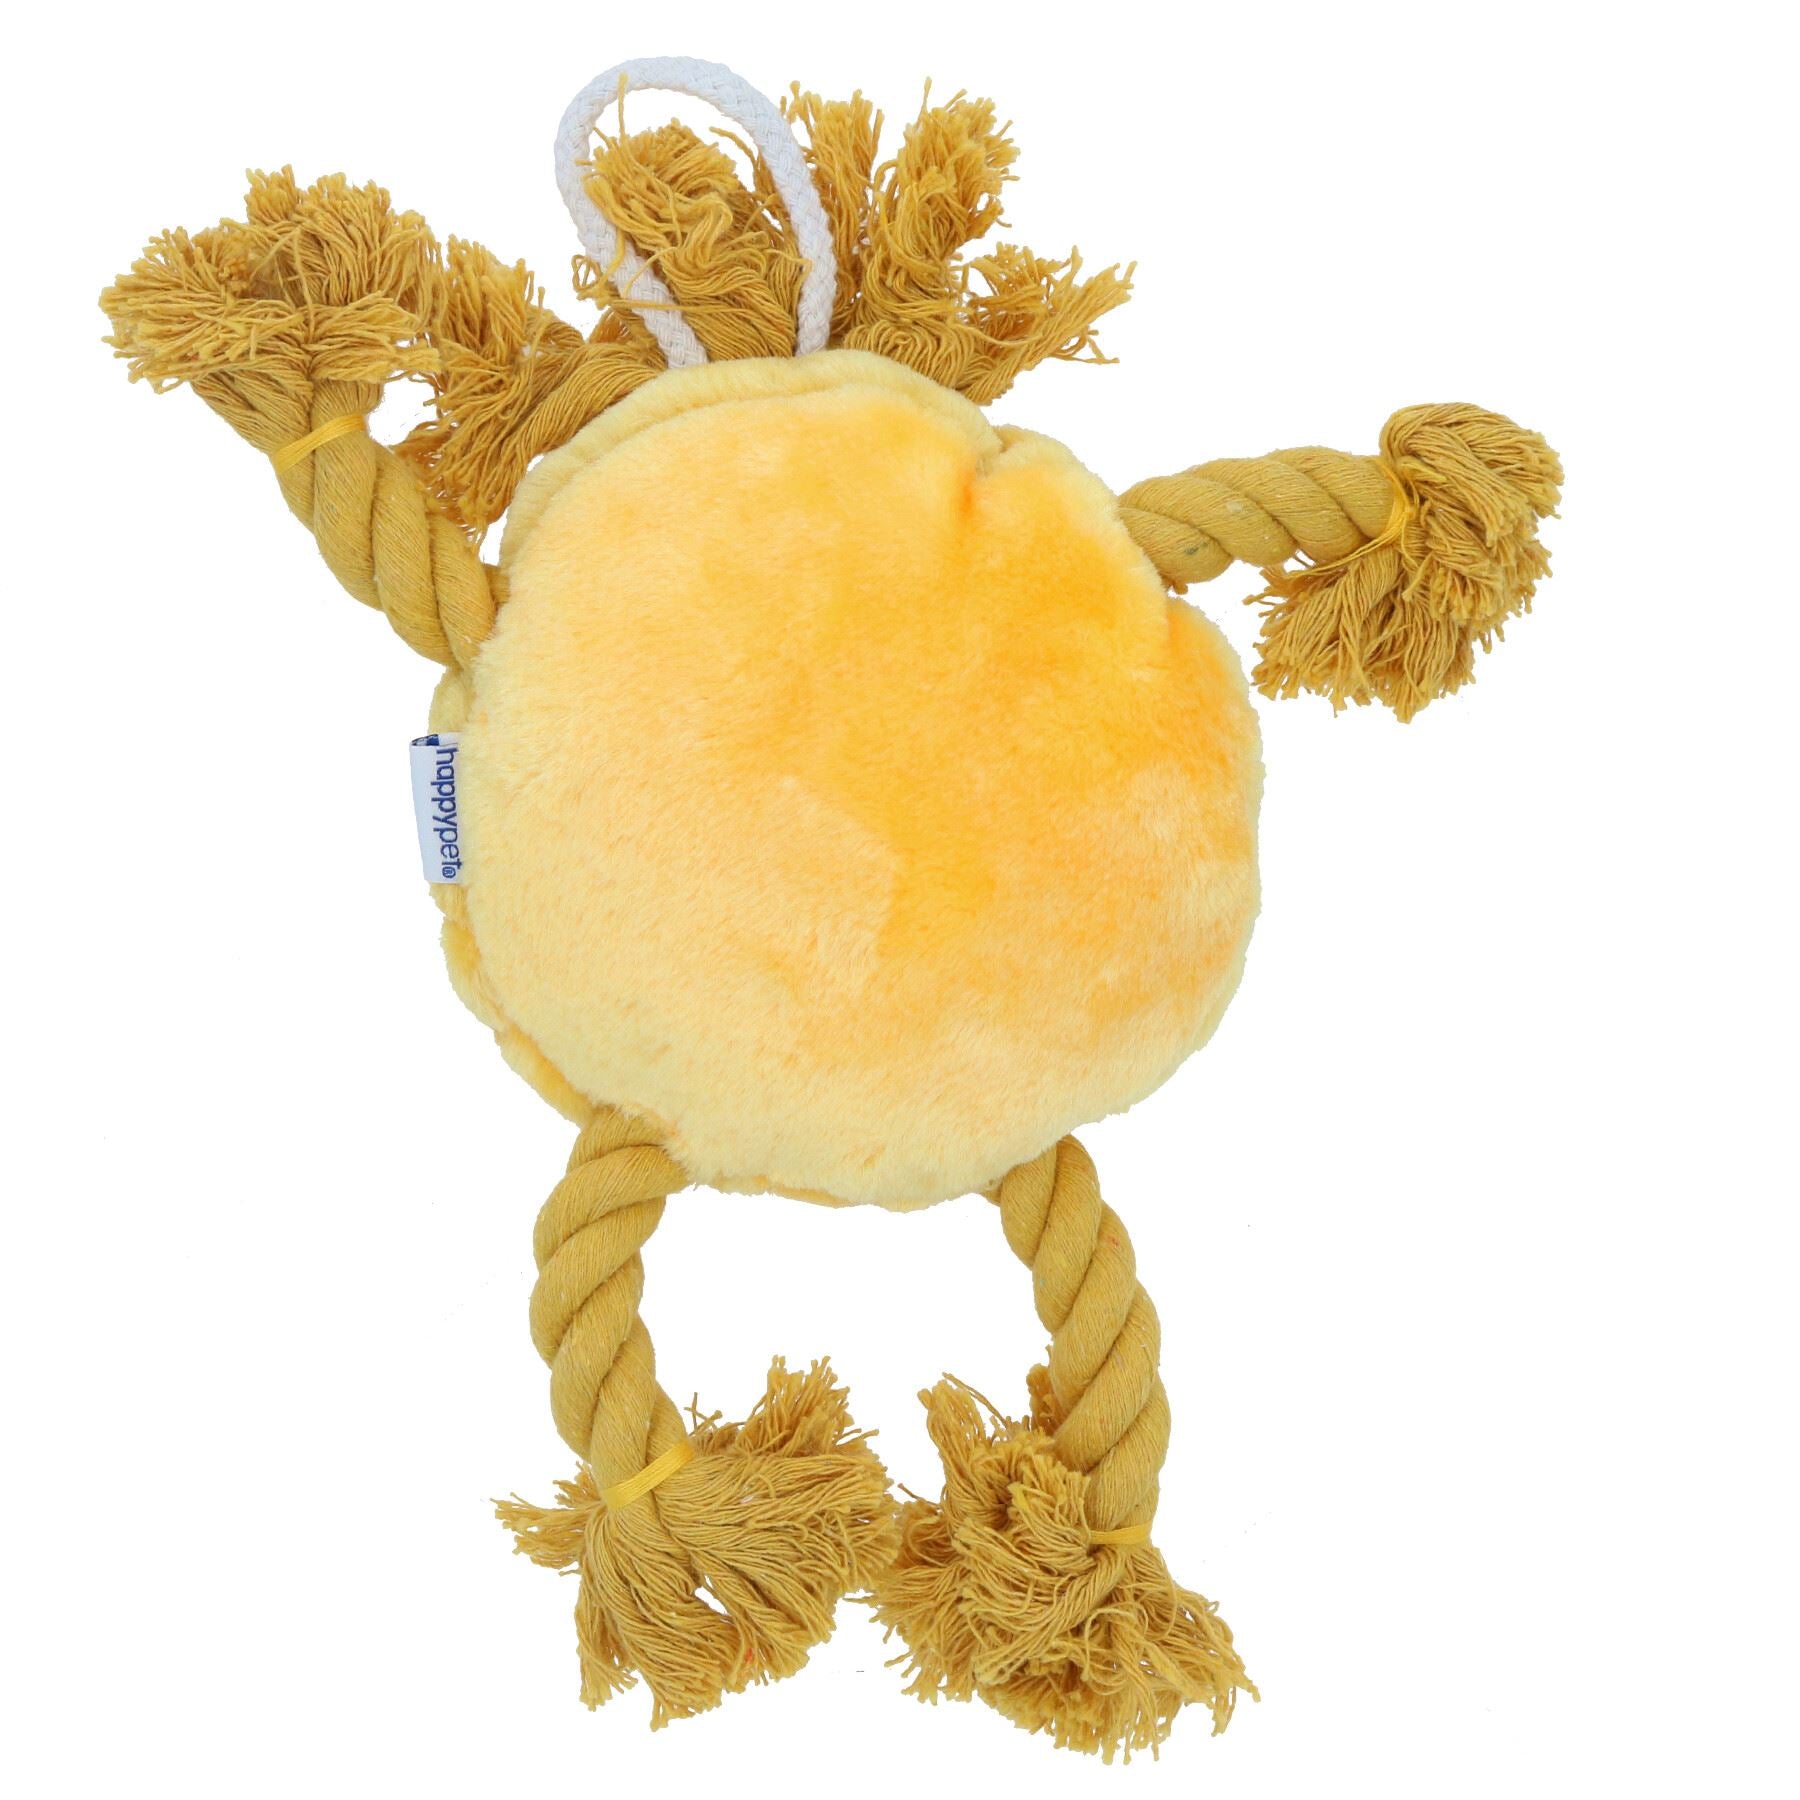 Plush Soft Yellow Happy Face Dog Play Toy With Squeak & Rope Arms.